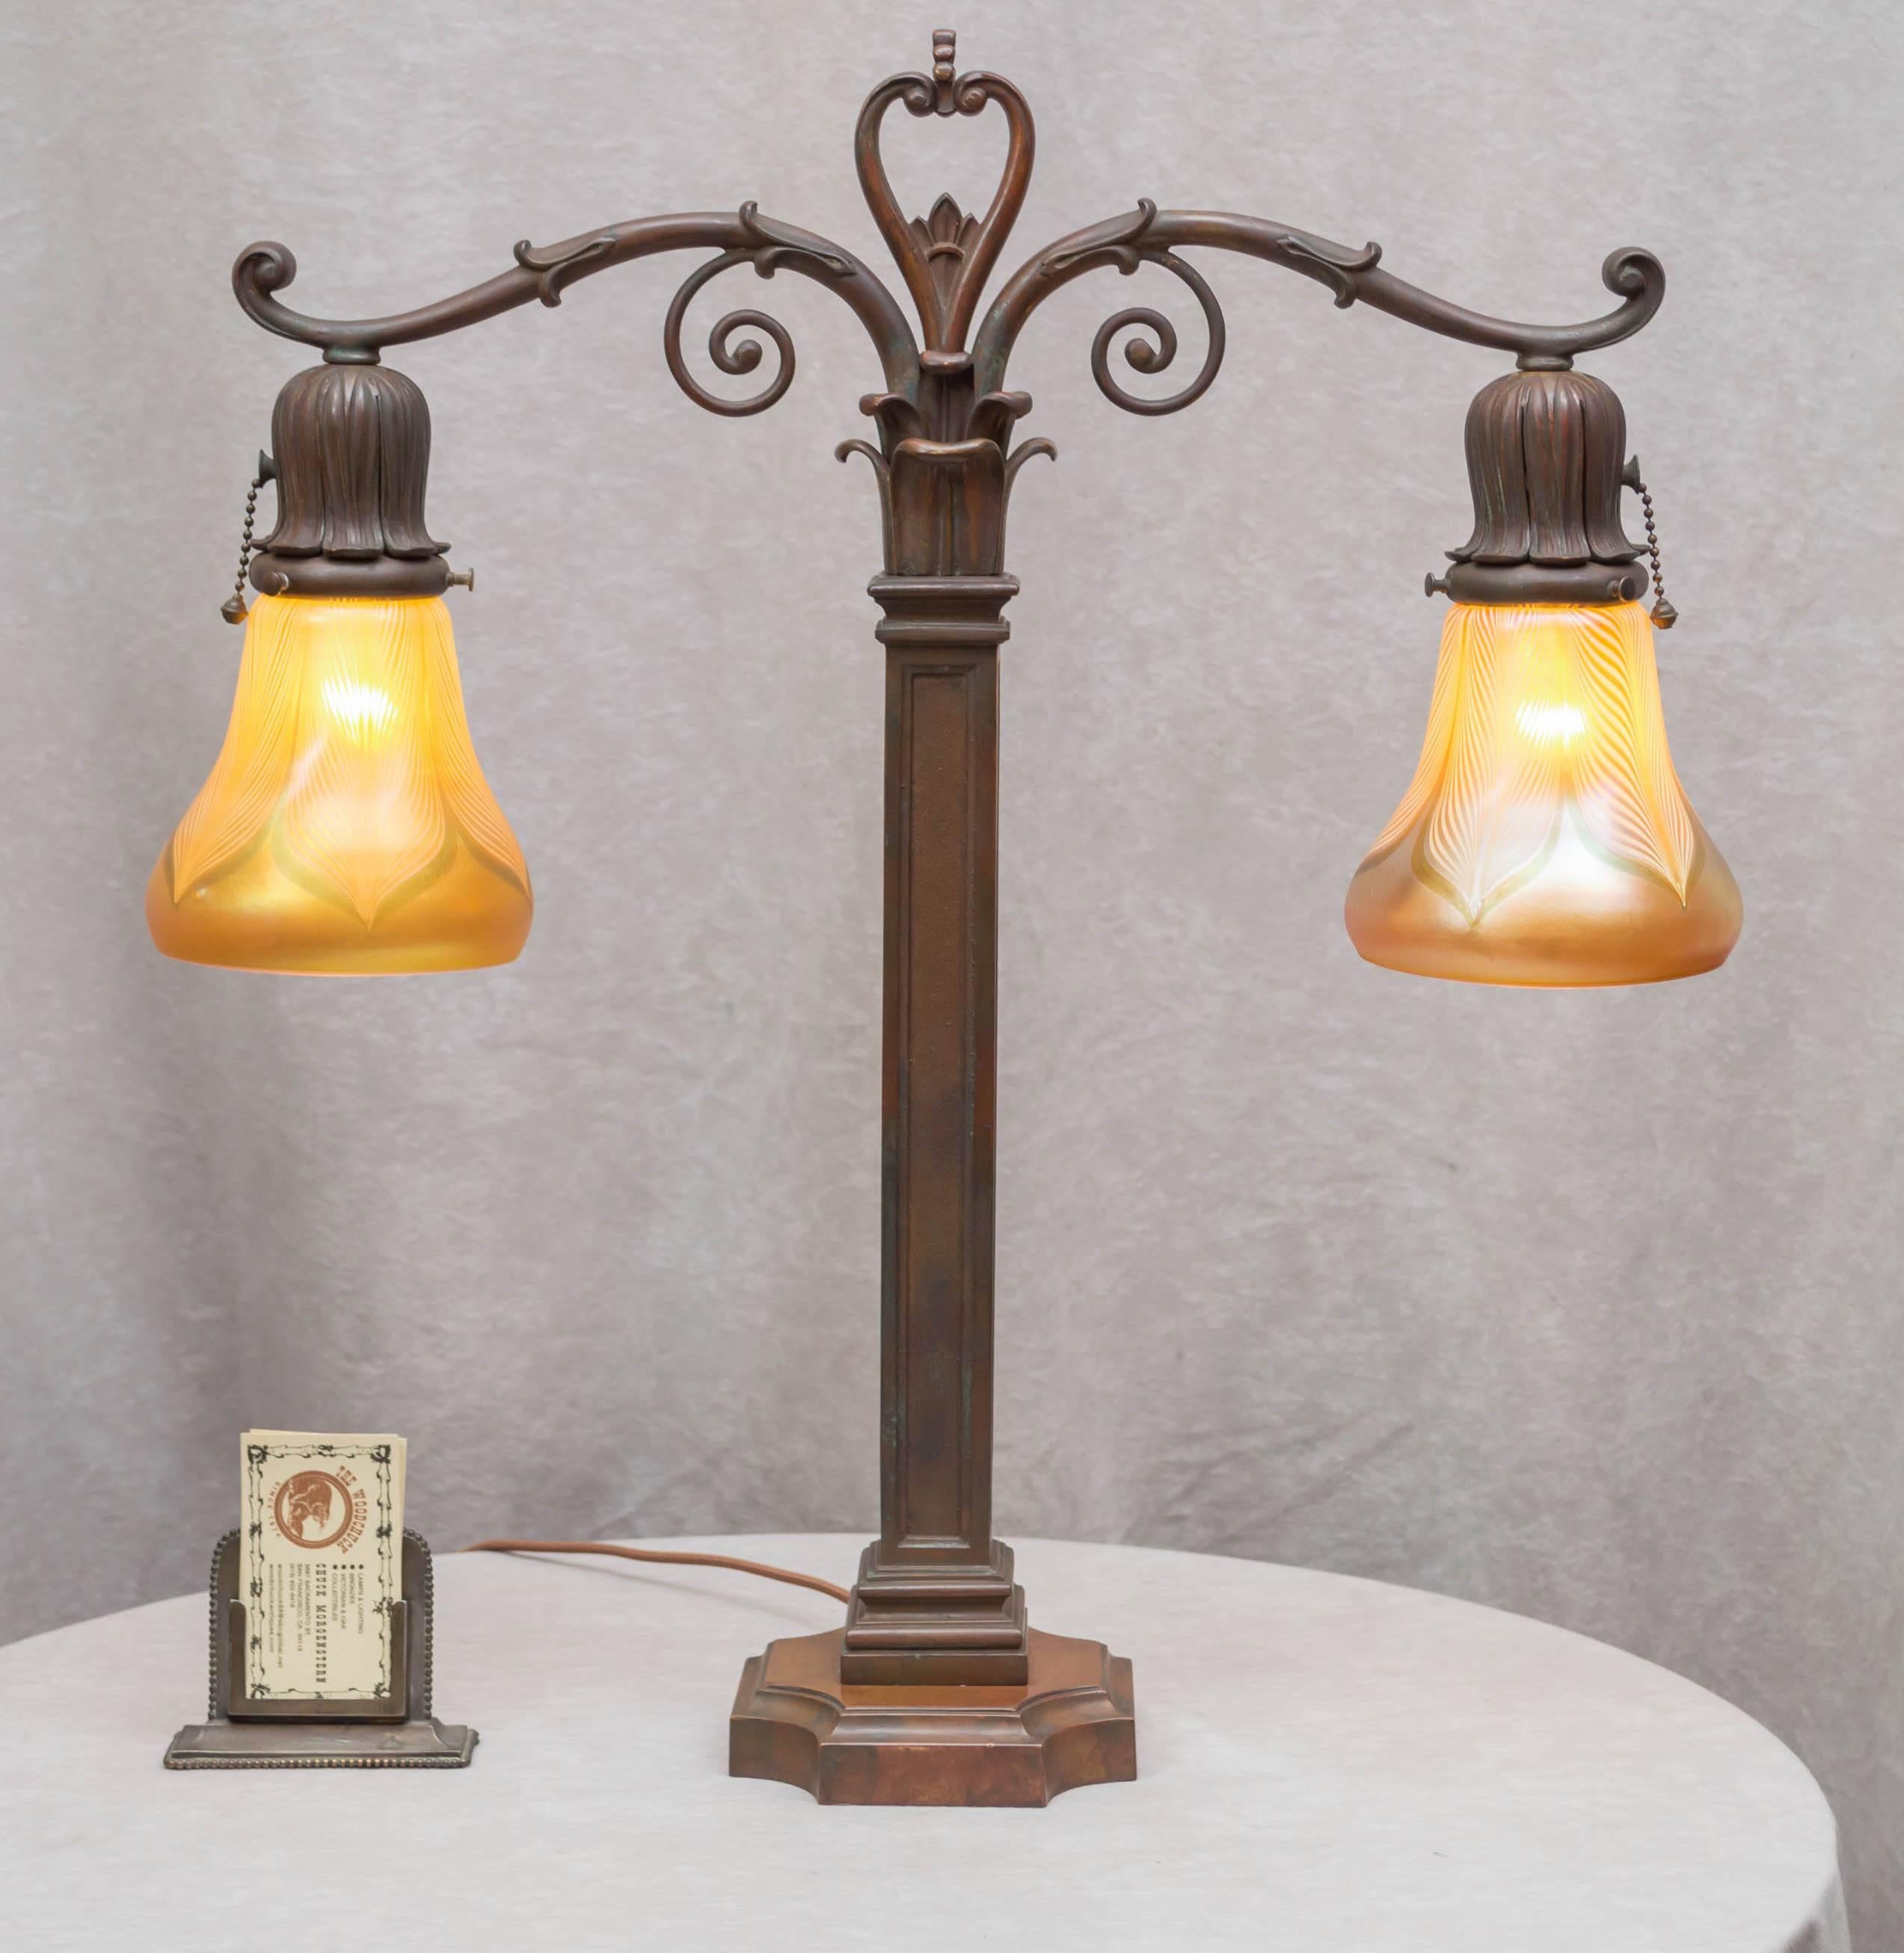 This lamp is done in the highest quality workmanship. The casting and patina are first rate. There is a weight on the bottom so while it looks like it could fall over easily, it won't. We bought this without glass and put two of our best period art